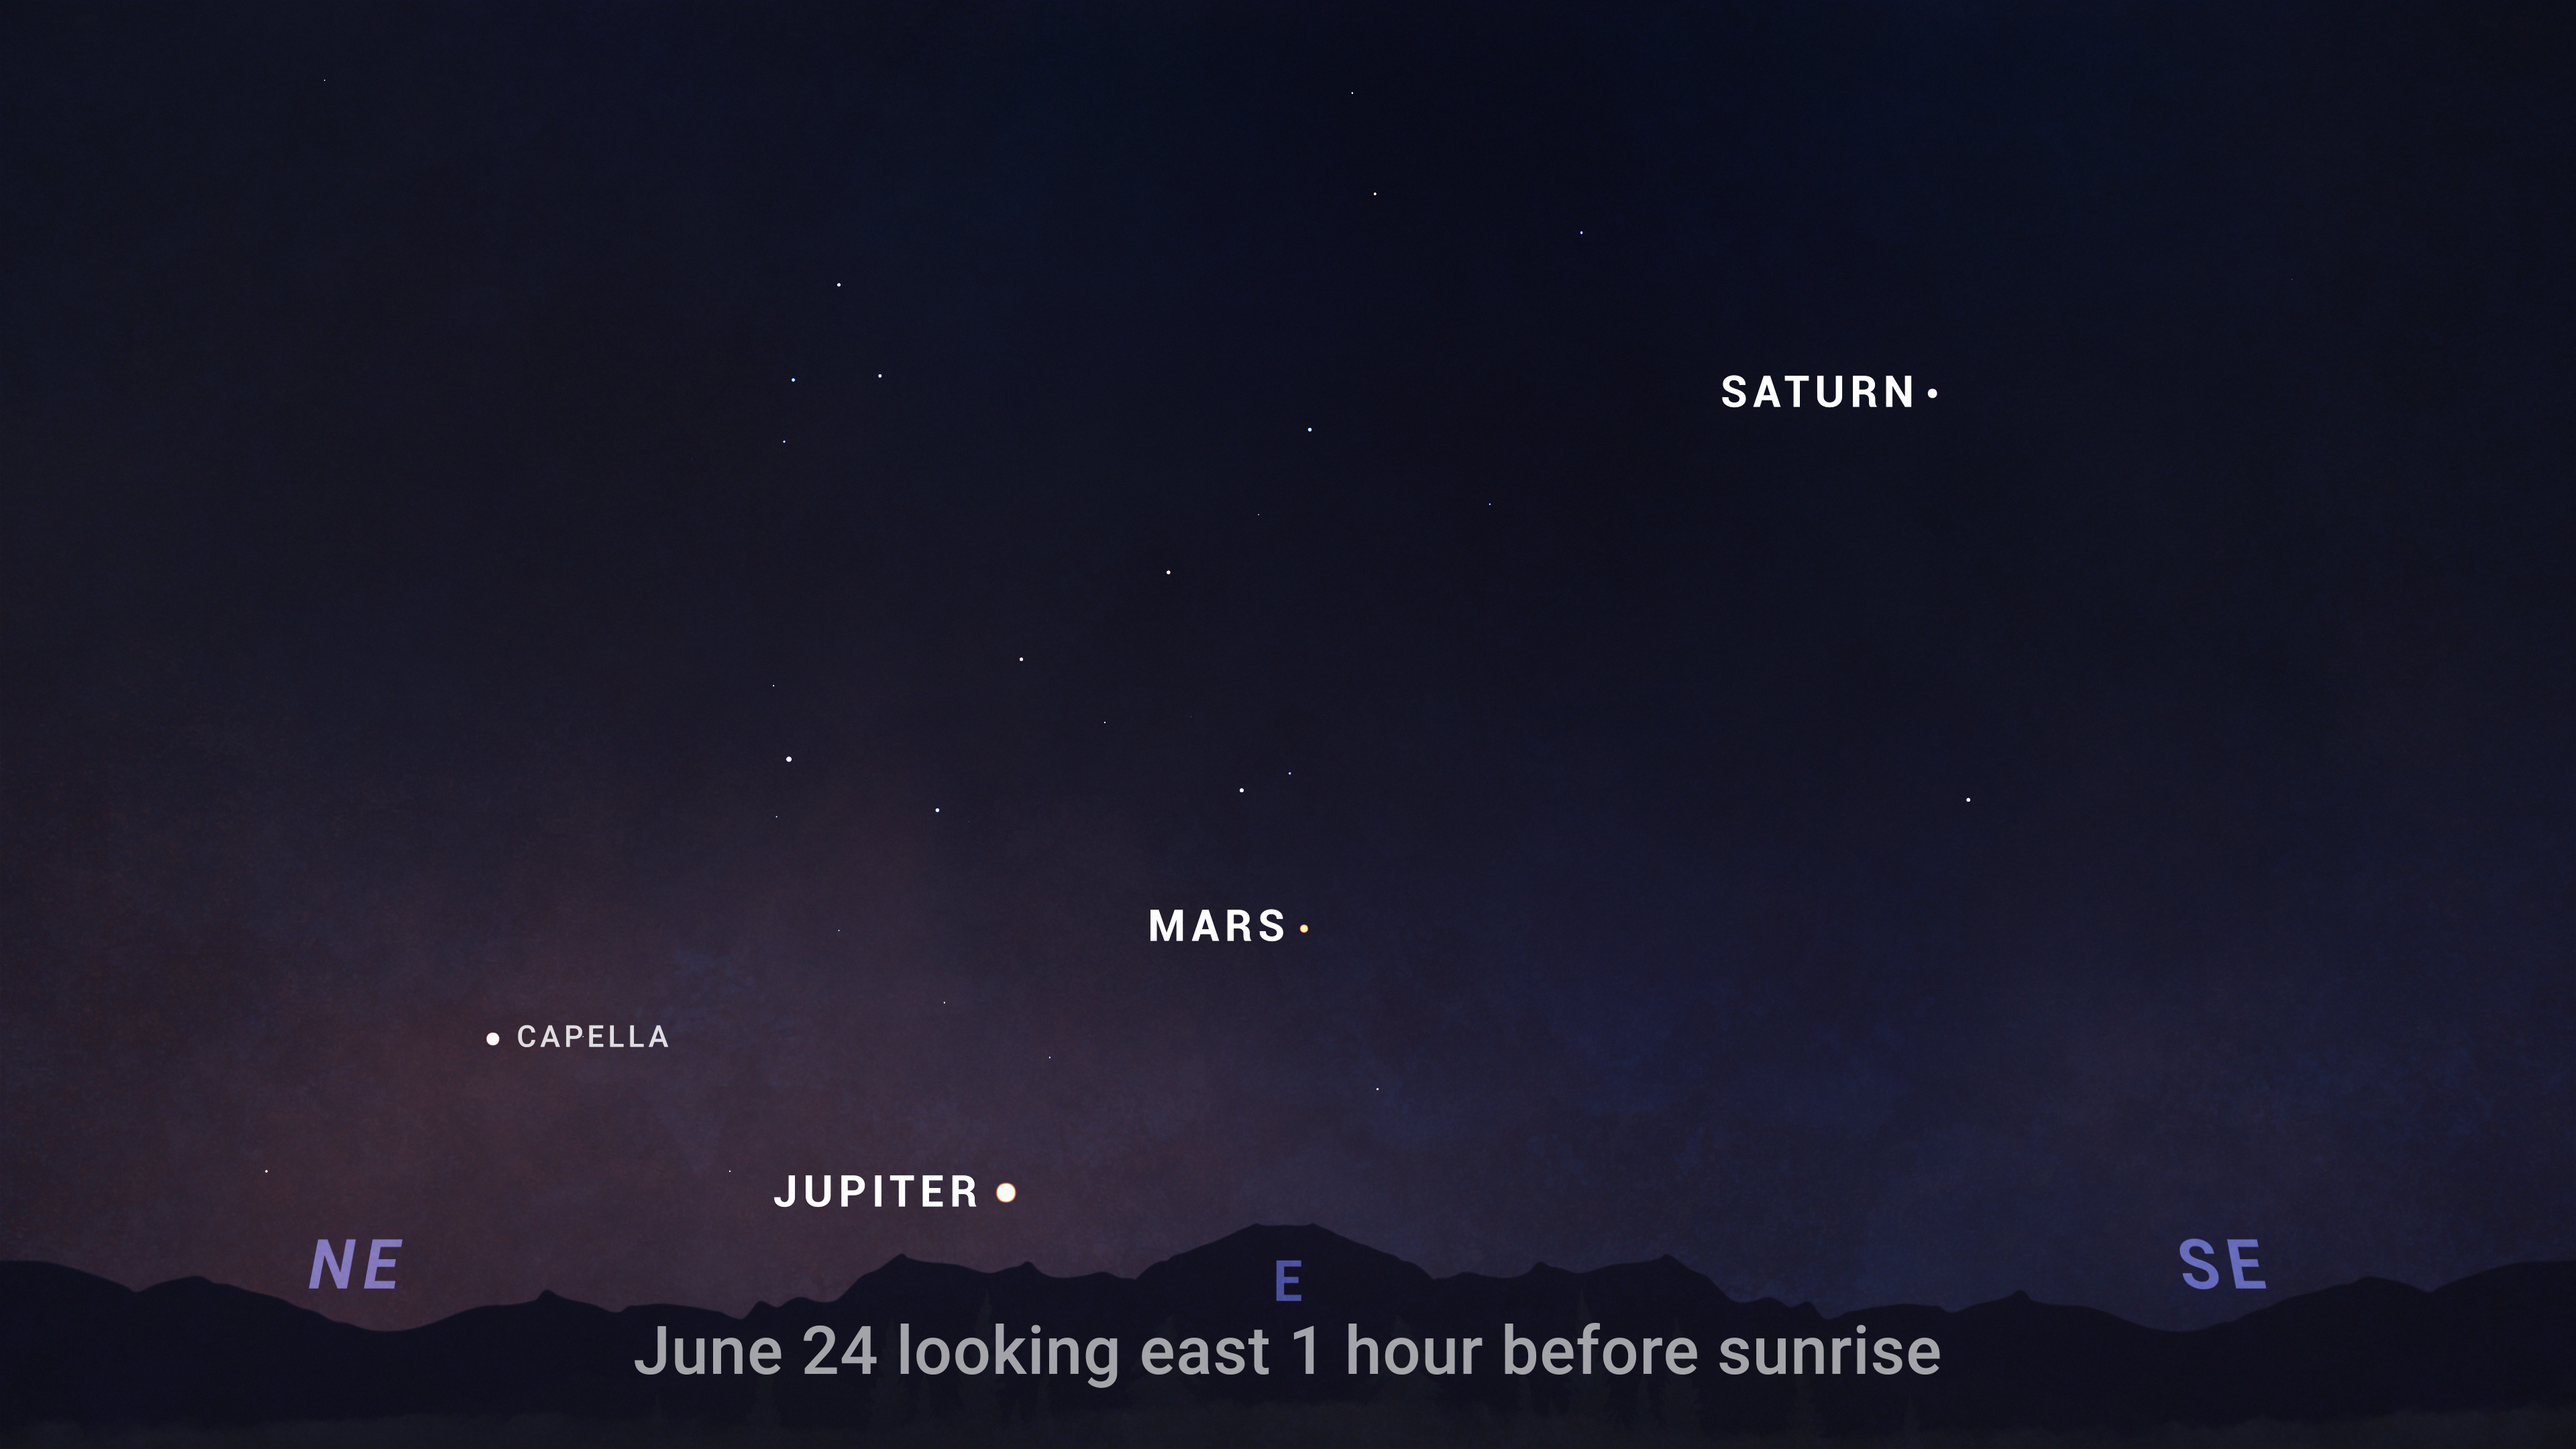 An illustrated sky chart shows the morning sky facing eastward, 1 hour before sunrise on June 24, 2024. The planets Jupiter, Mars, and Saturn are pictured as small white dots. Jupiter is quite low in the sky, left of center. Mars is higher to its right, just below center in the image. Saturn is seen higher, toward the upper right corner of the view. The bright star Capella is seen at far left, slightly higher and to the left of Jupiter.